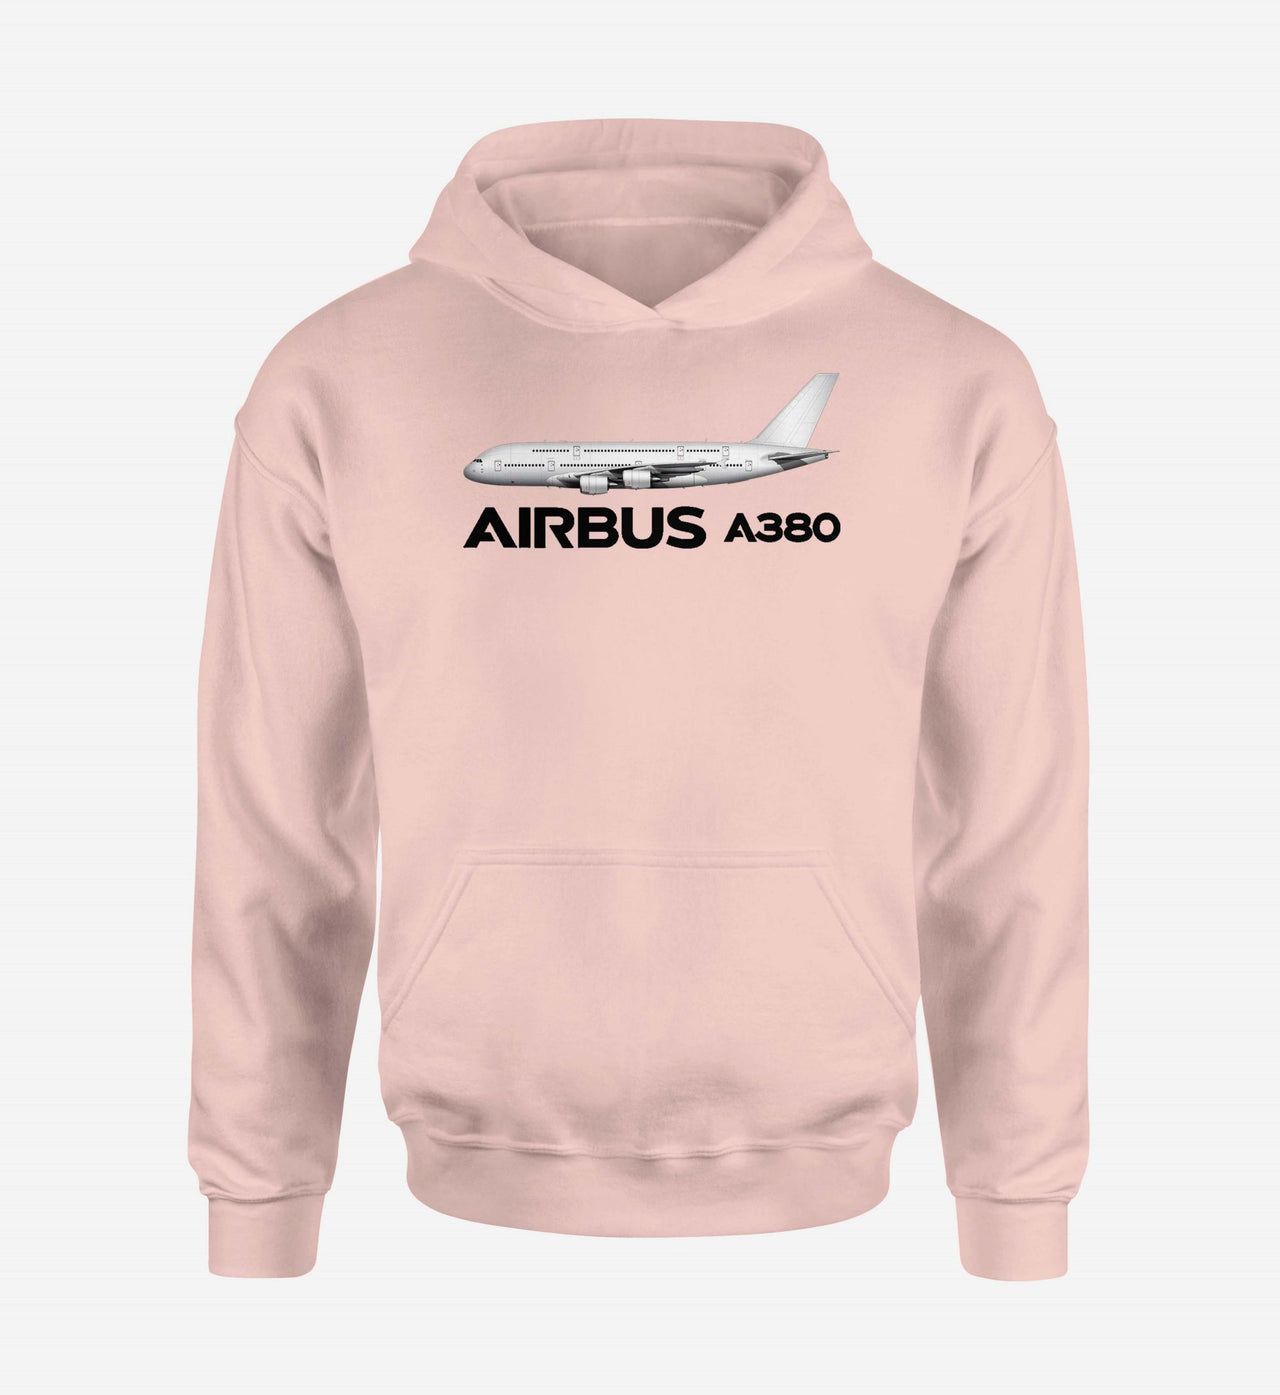 The Airbus A380 Designed Hoodies